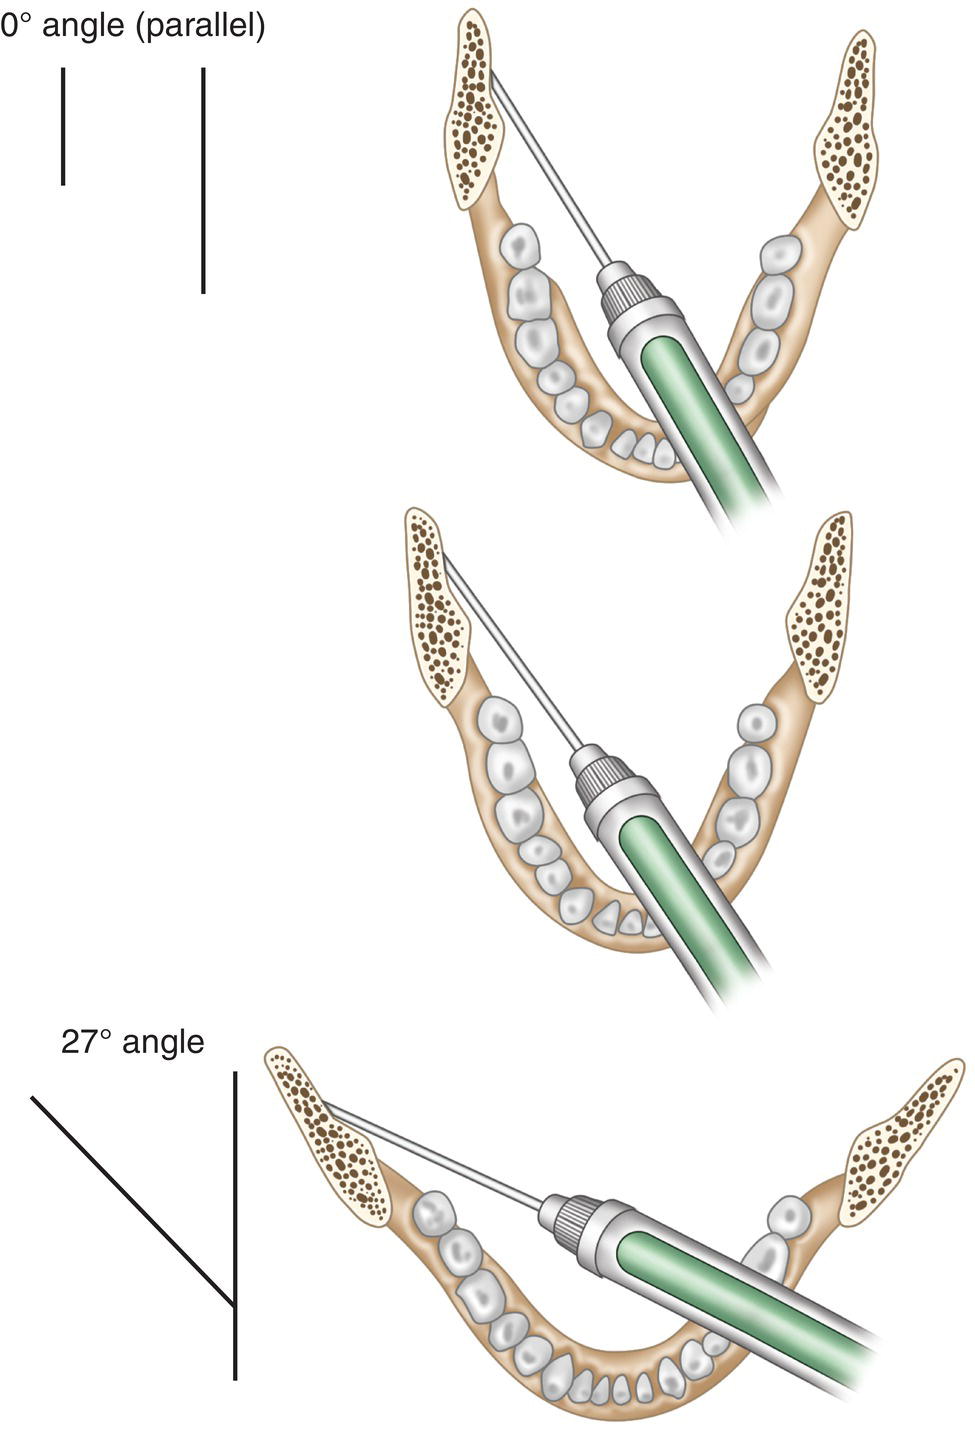 Three illustrations of syringe positioned at contralateral mandibular molars increasing angles from 0 to 27 degrees.